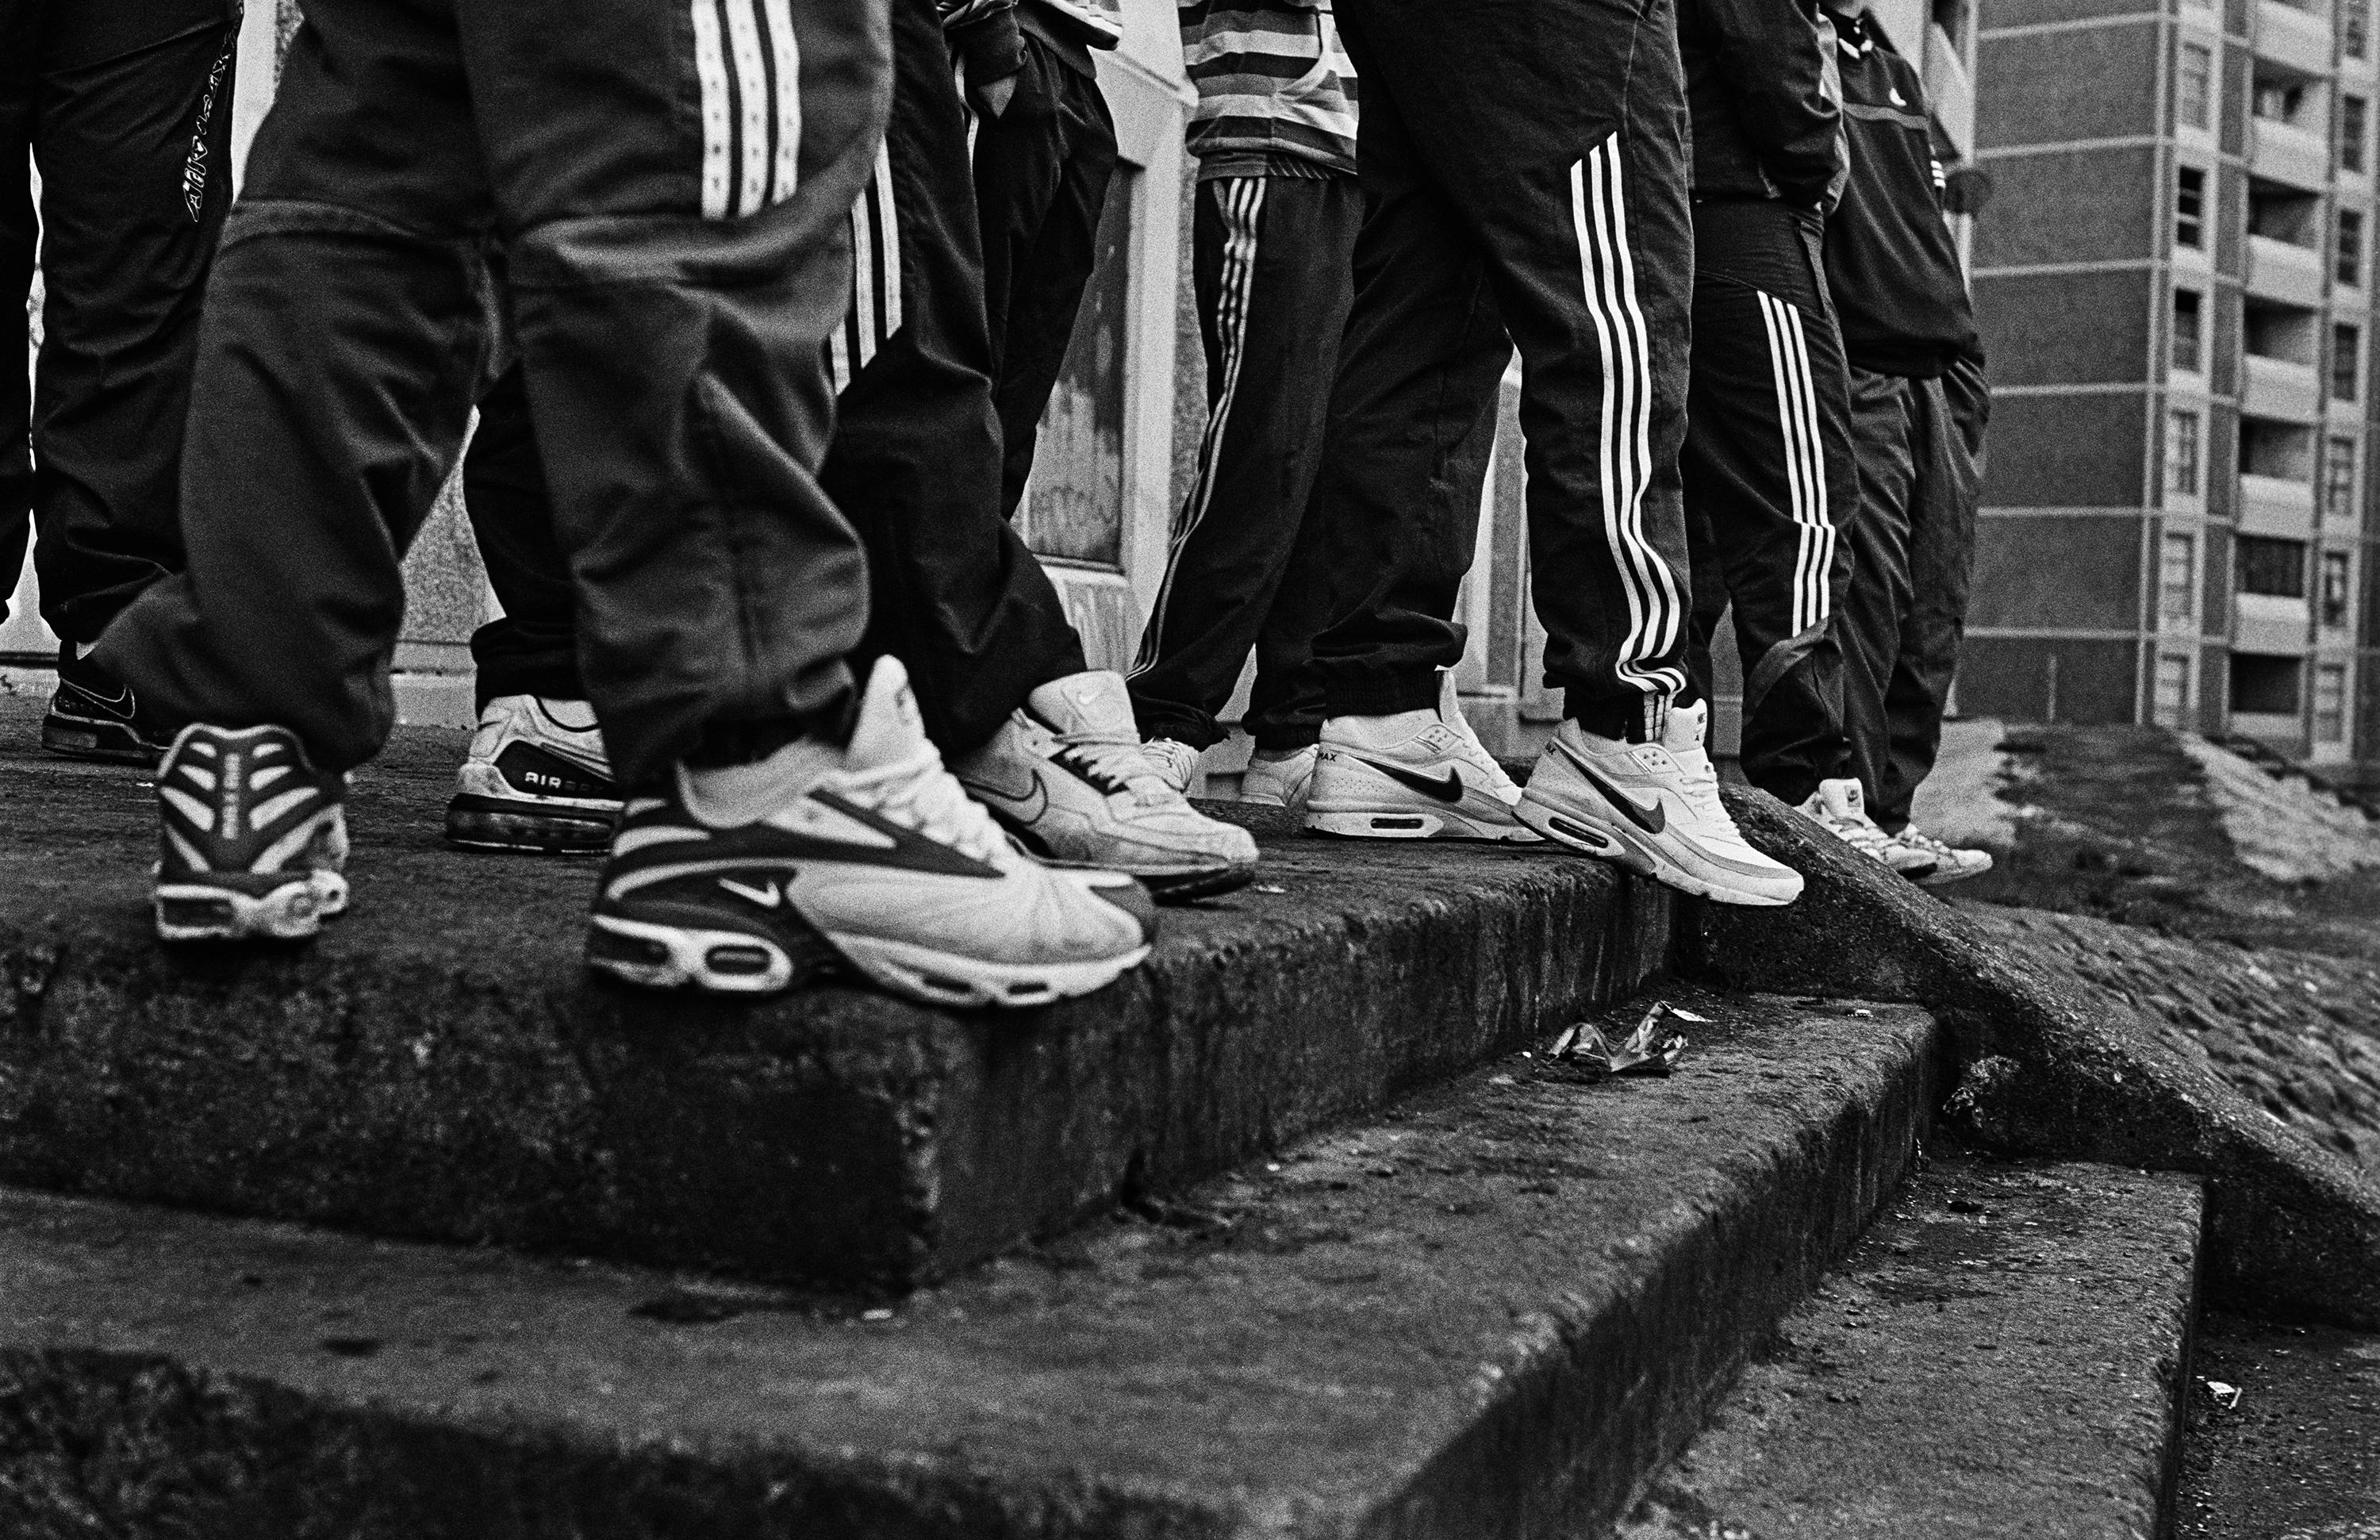 Photograph from Ross McDonnell showing young irishmen's sneakers.